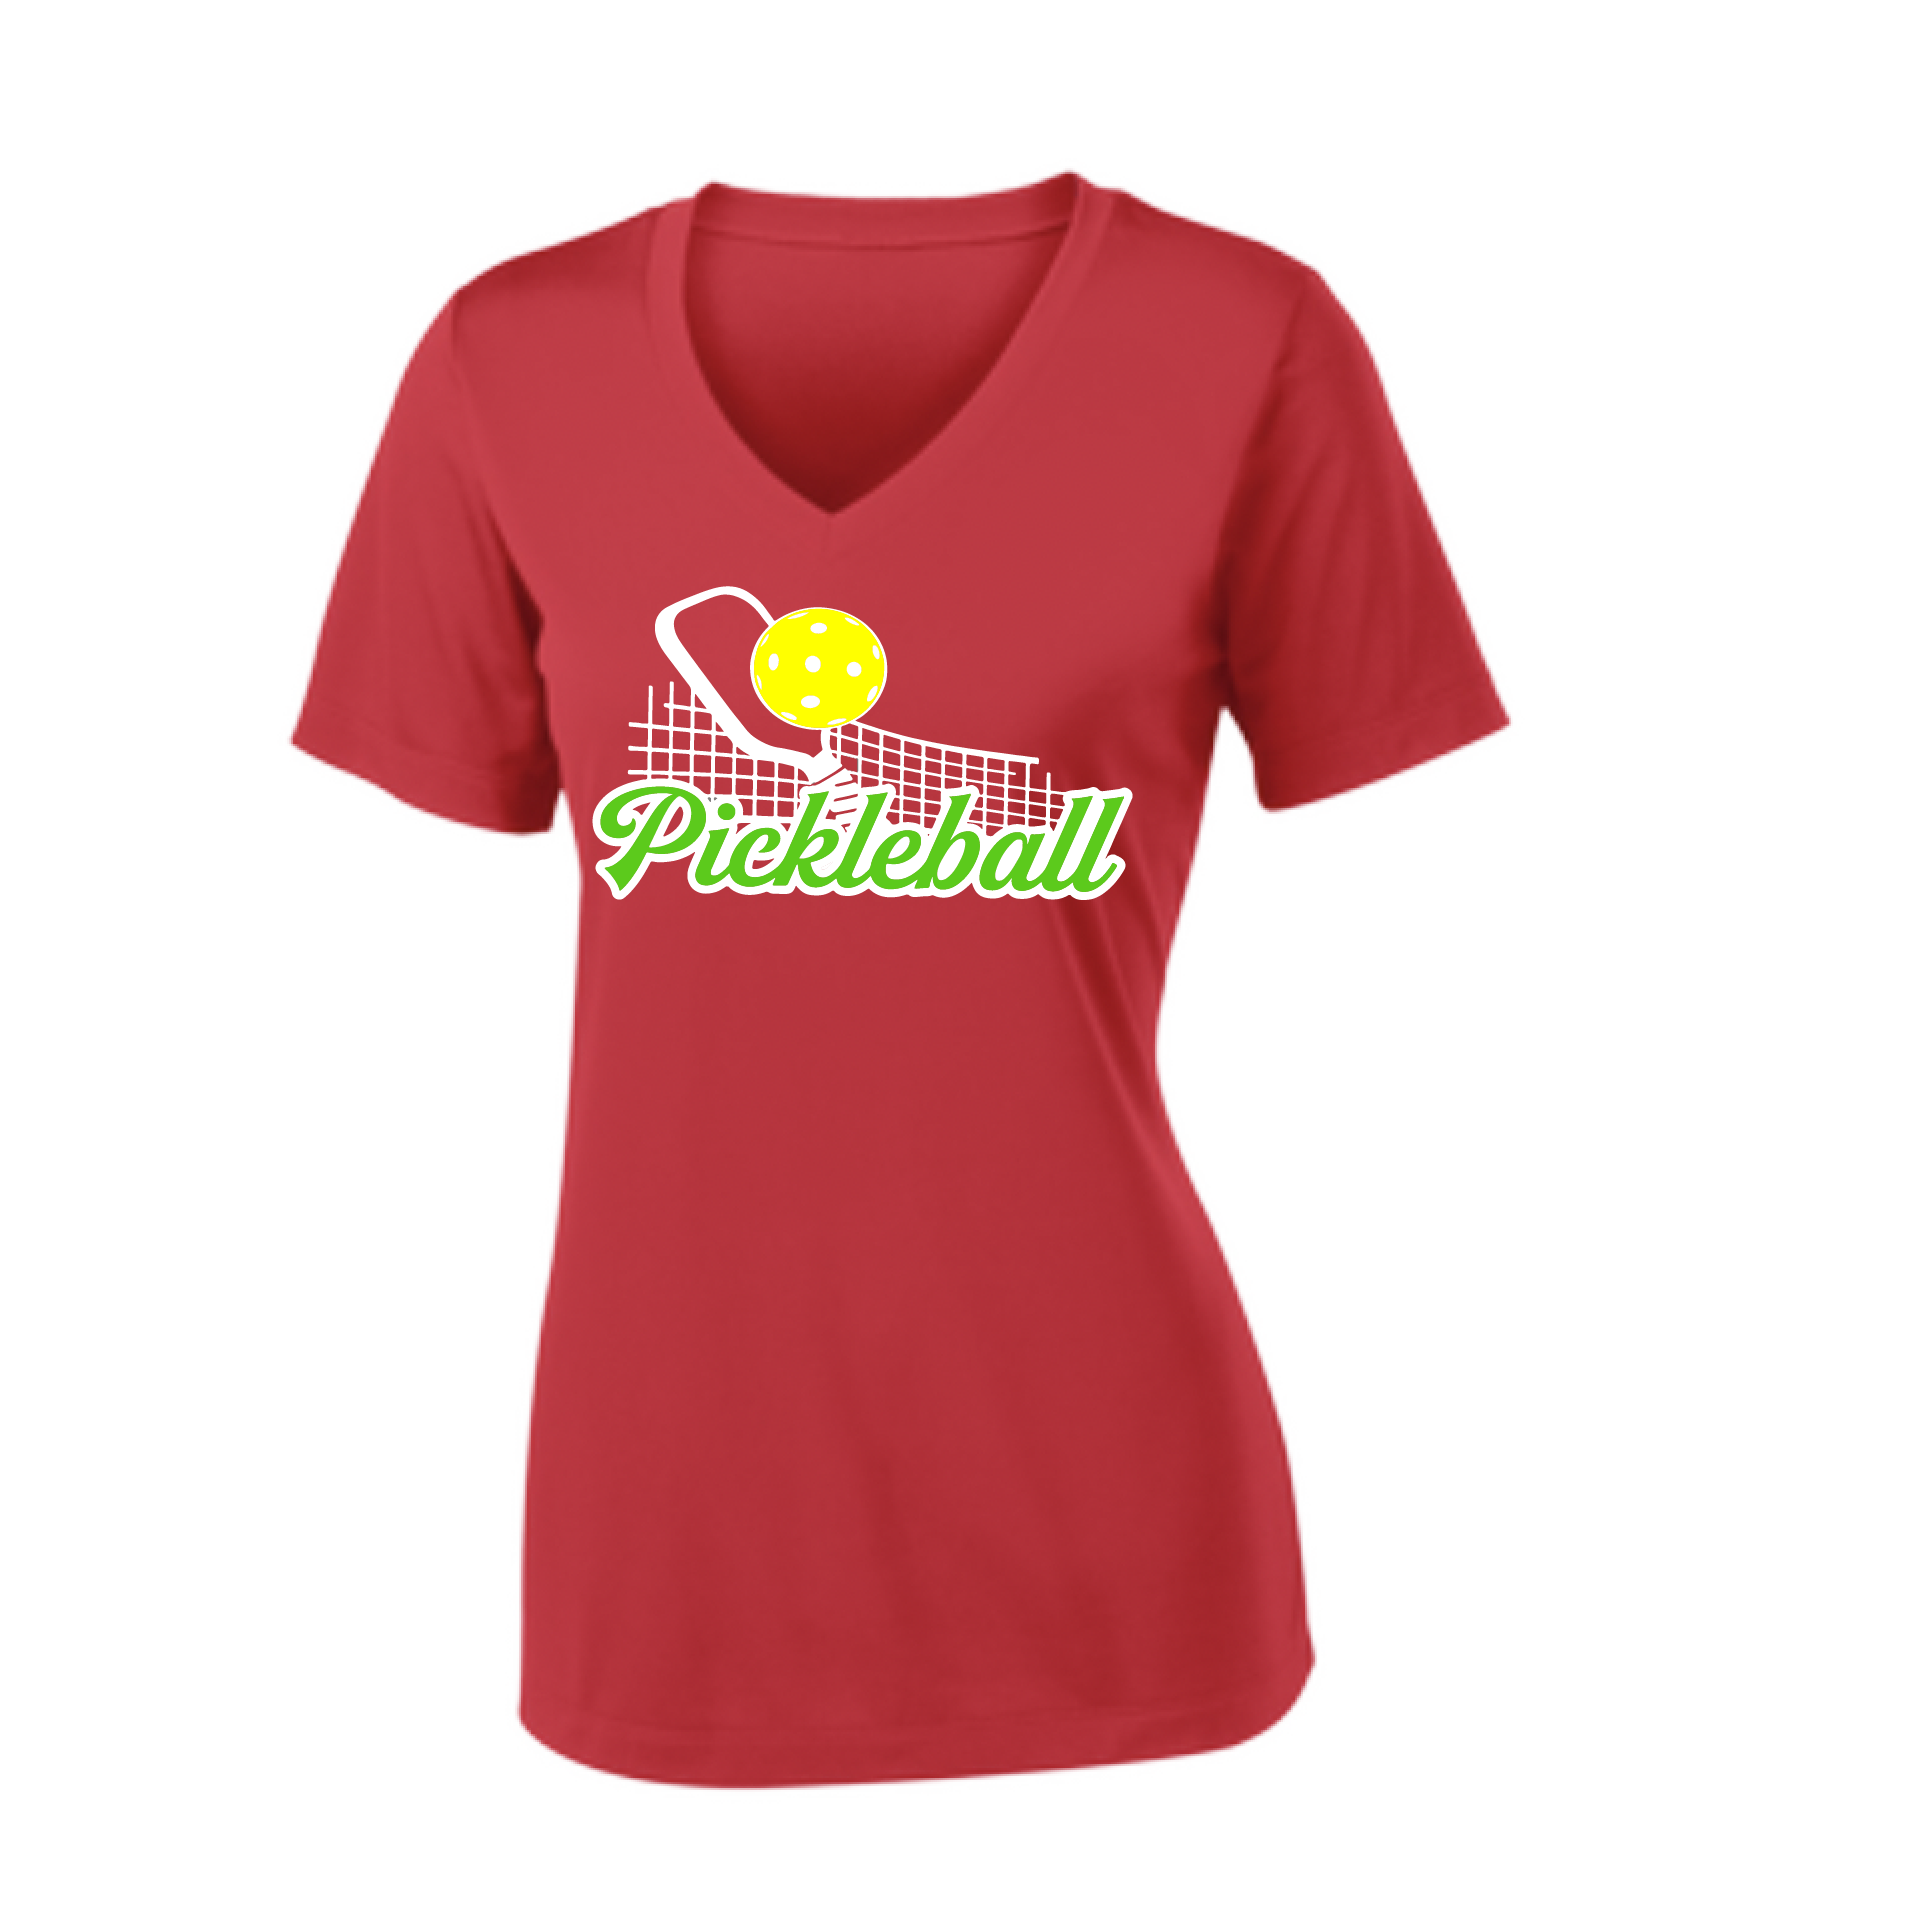 Pickleball Design: Pickleball  and Net  Women's Style: Short Sleeve V-Neck  Turn up the volume in this Women's shirt with its perfect mix of softness and attitude. Material is ultra-comfortable with moisture wicking properties and tri-blend softness. PosiCharge technology locks in color. Highly breathable and lightweight.